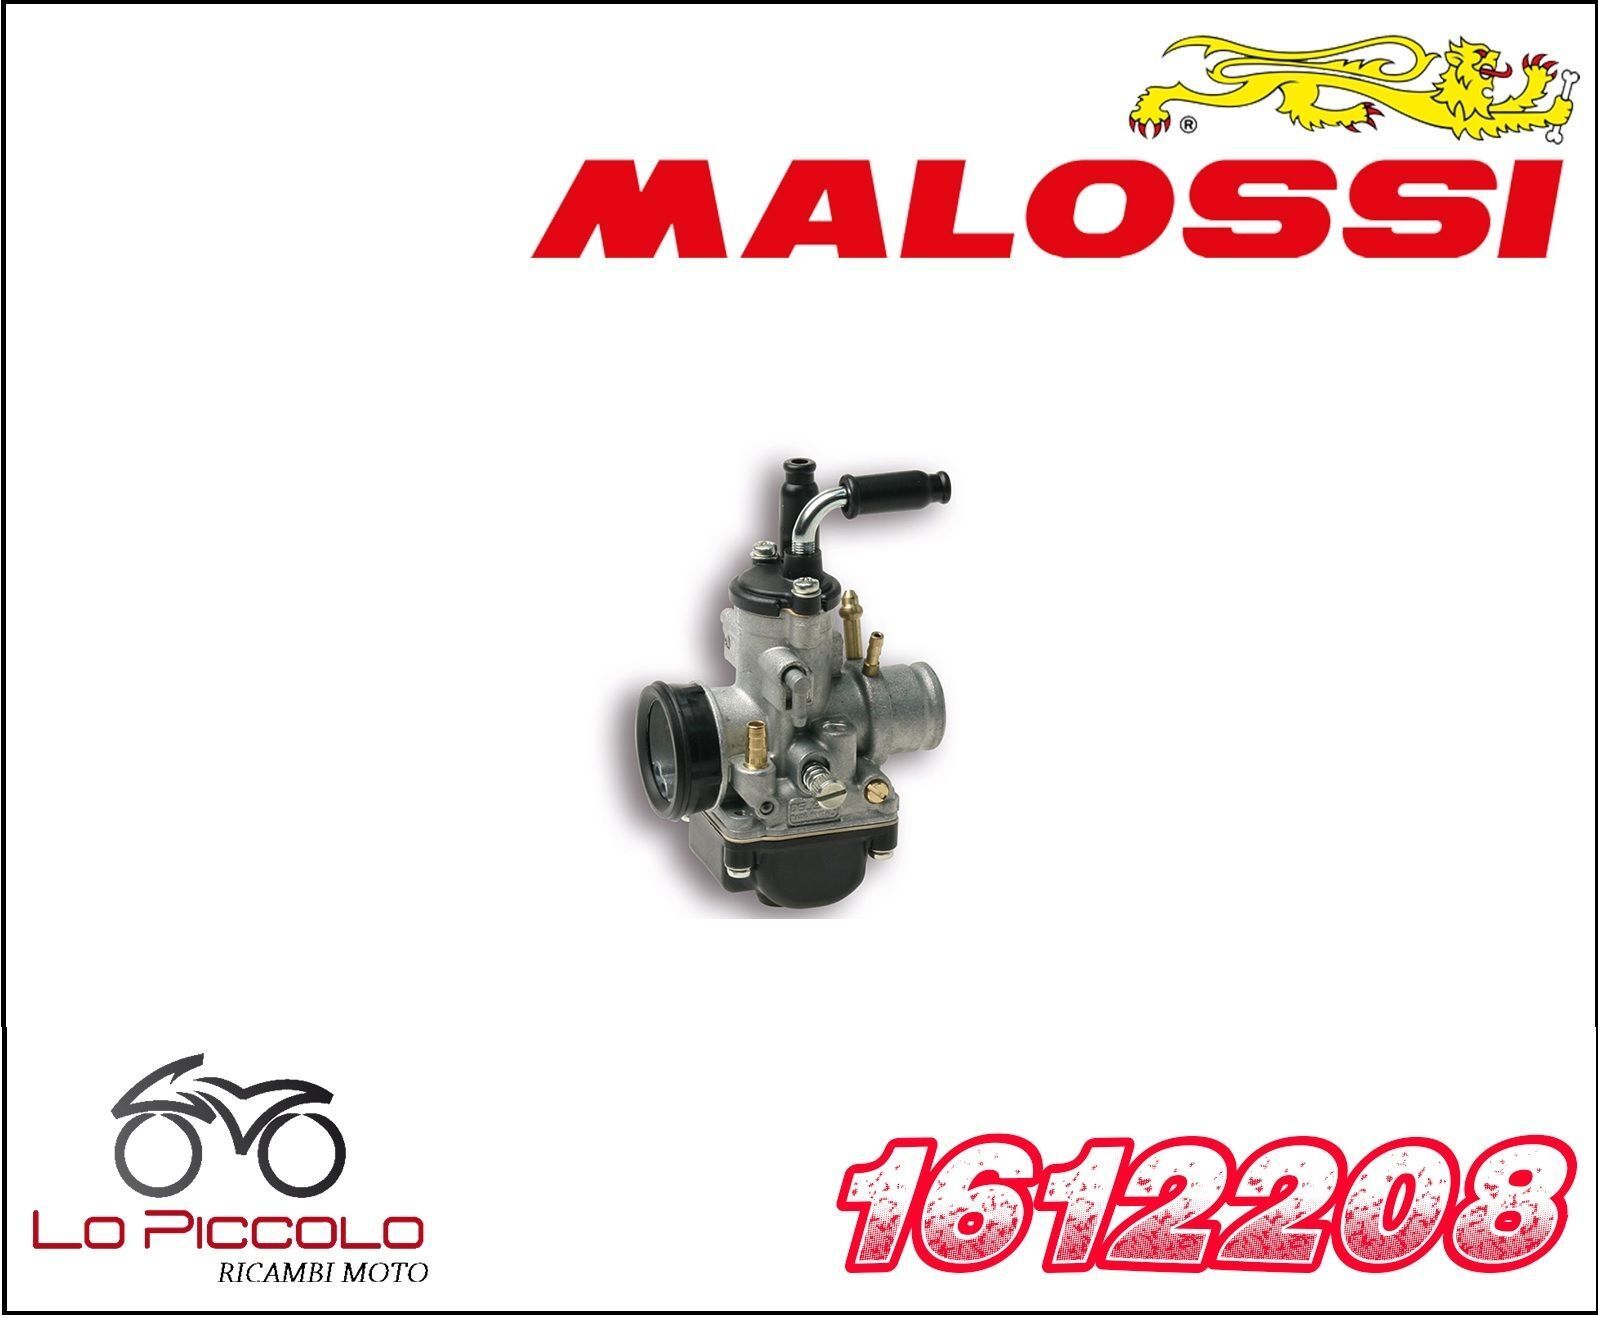 1612208 Carburettor Complete MALOSSI Phbg 21 Max 42% OFF DS 1 RR Derapage Our shop OFFers the best service Hm